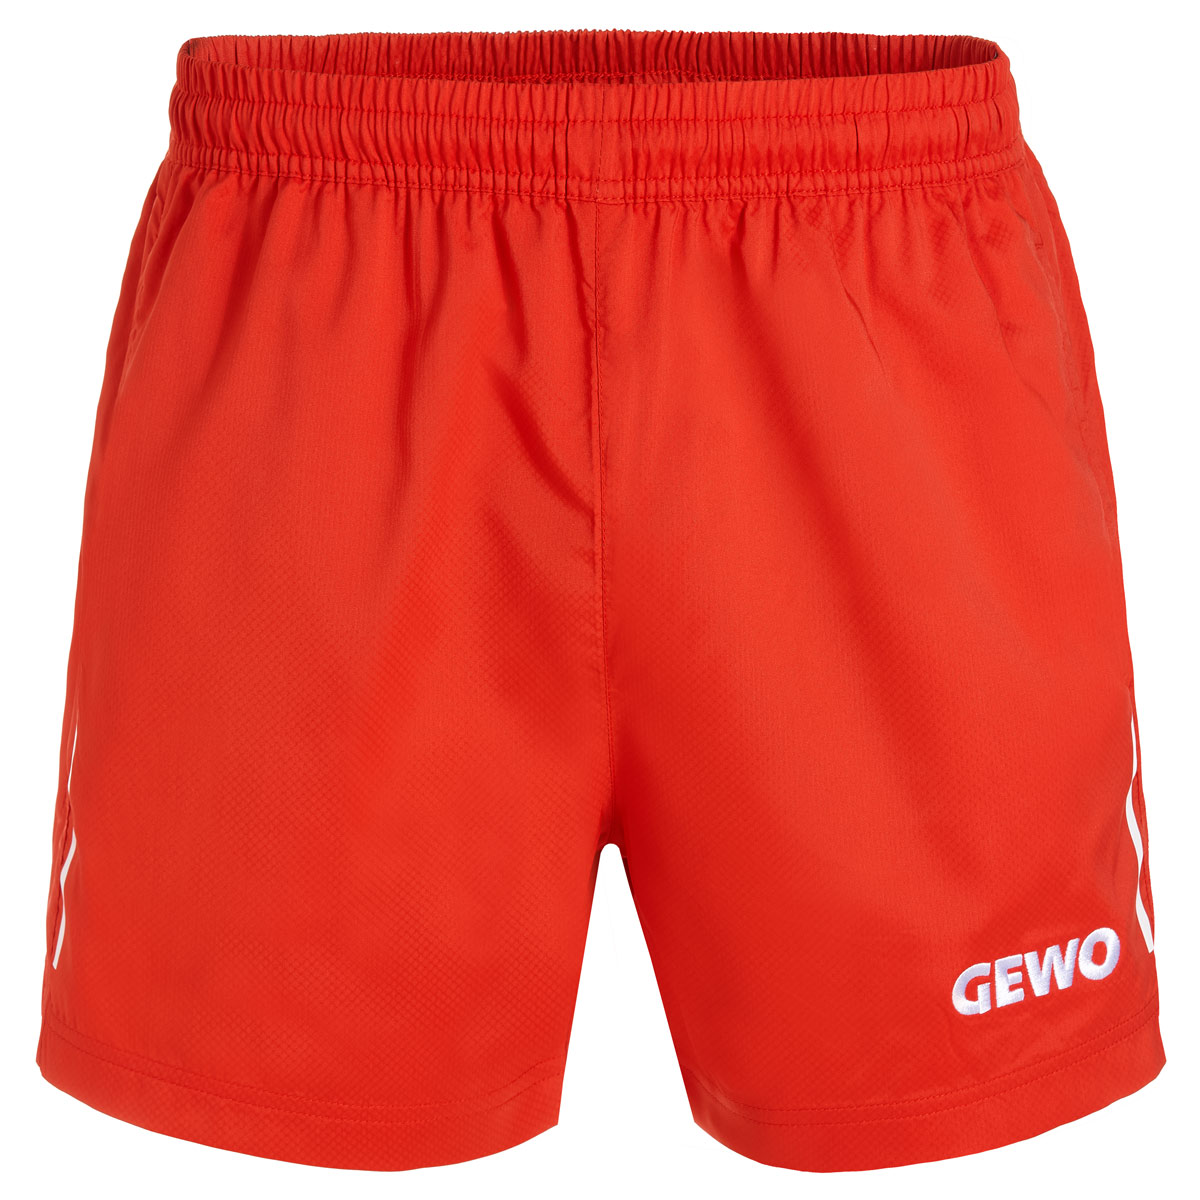 GEWO Shorts Paza Color I red XS